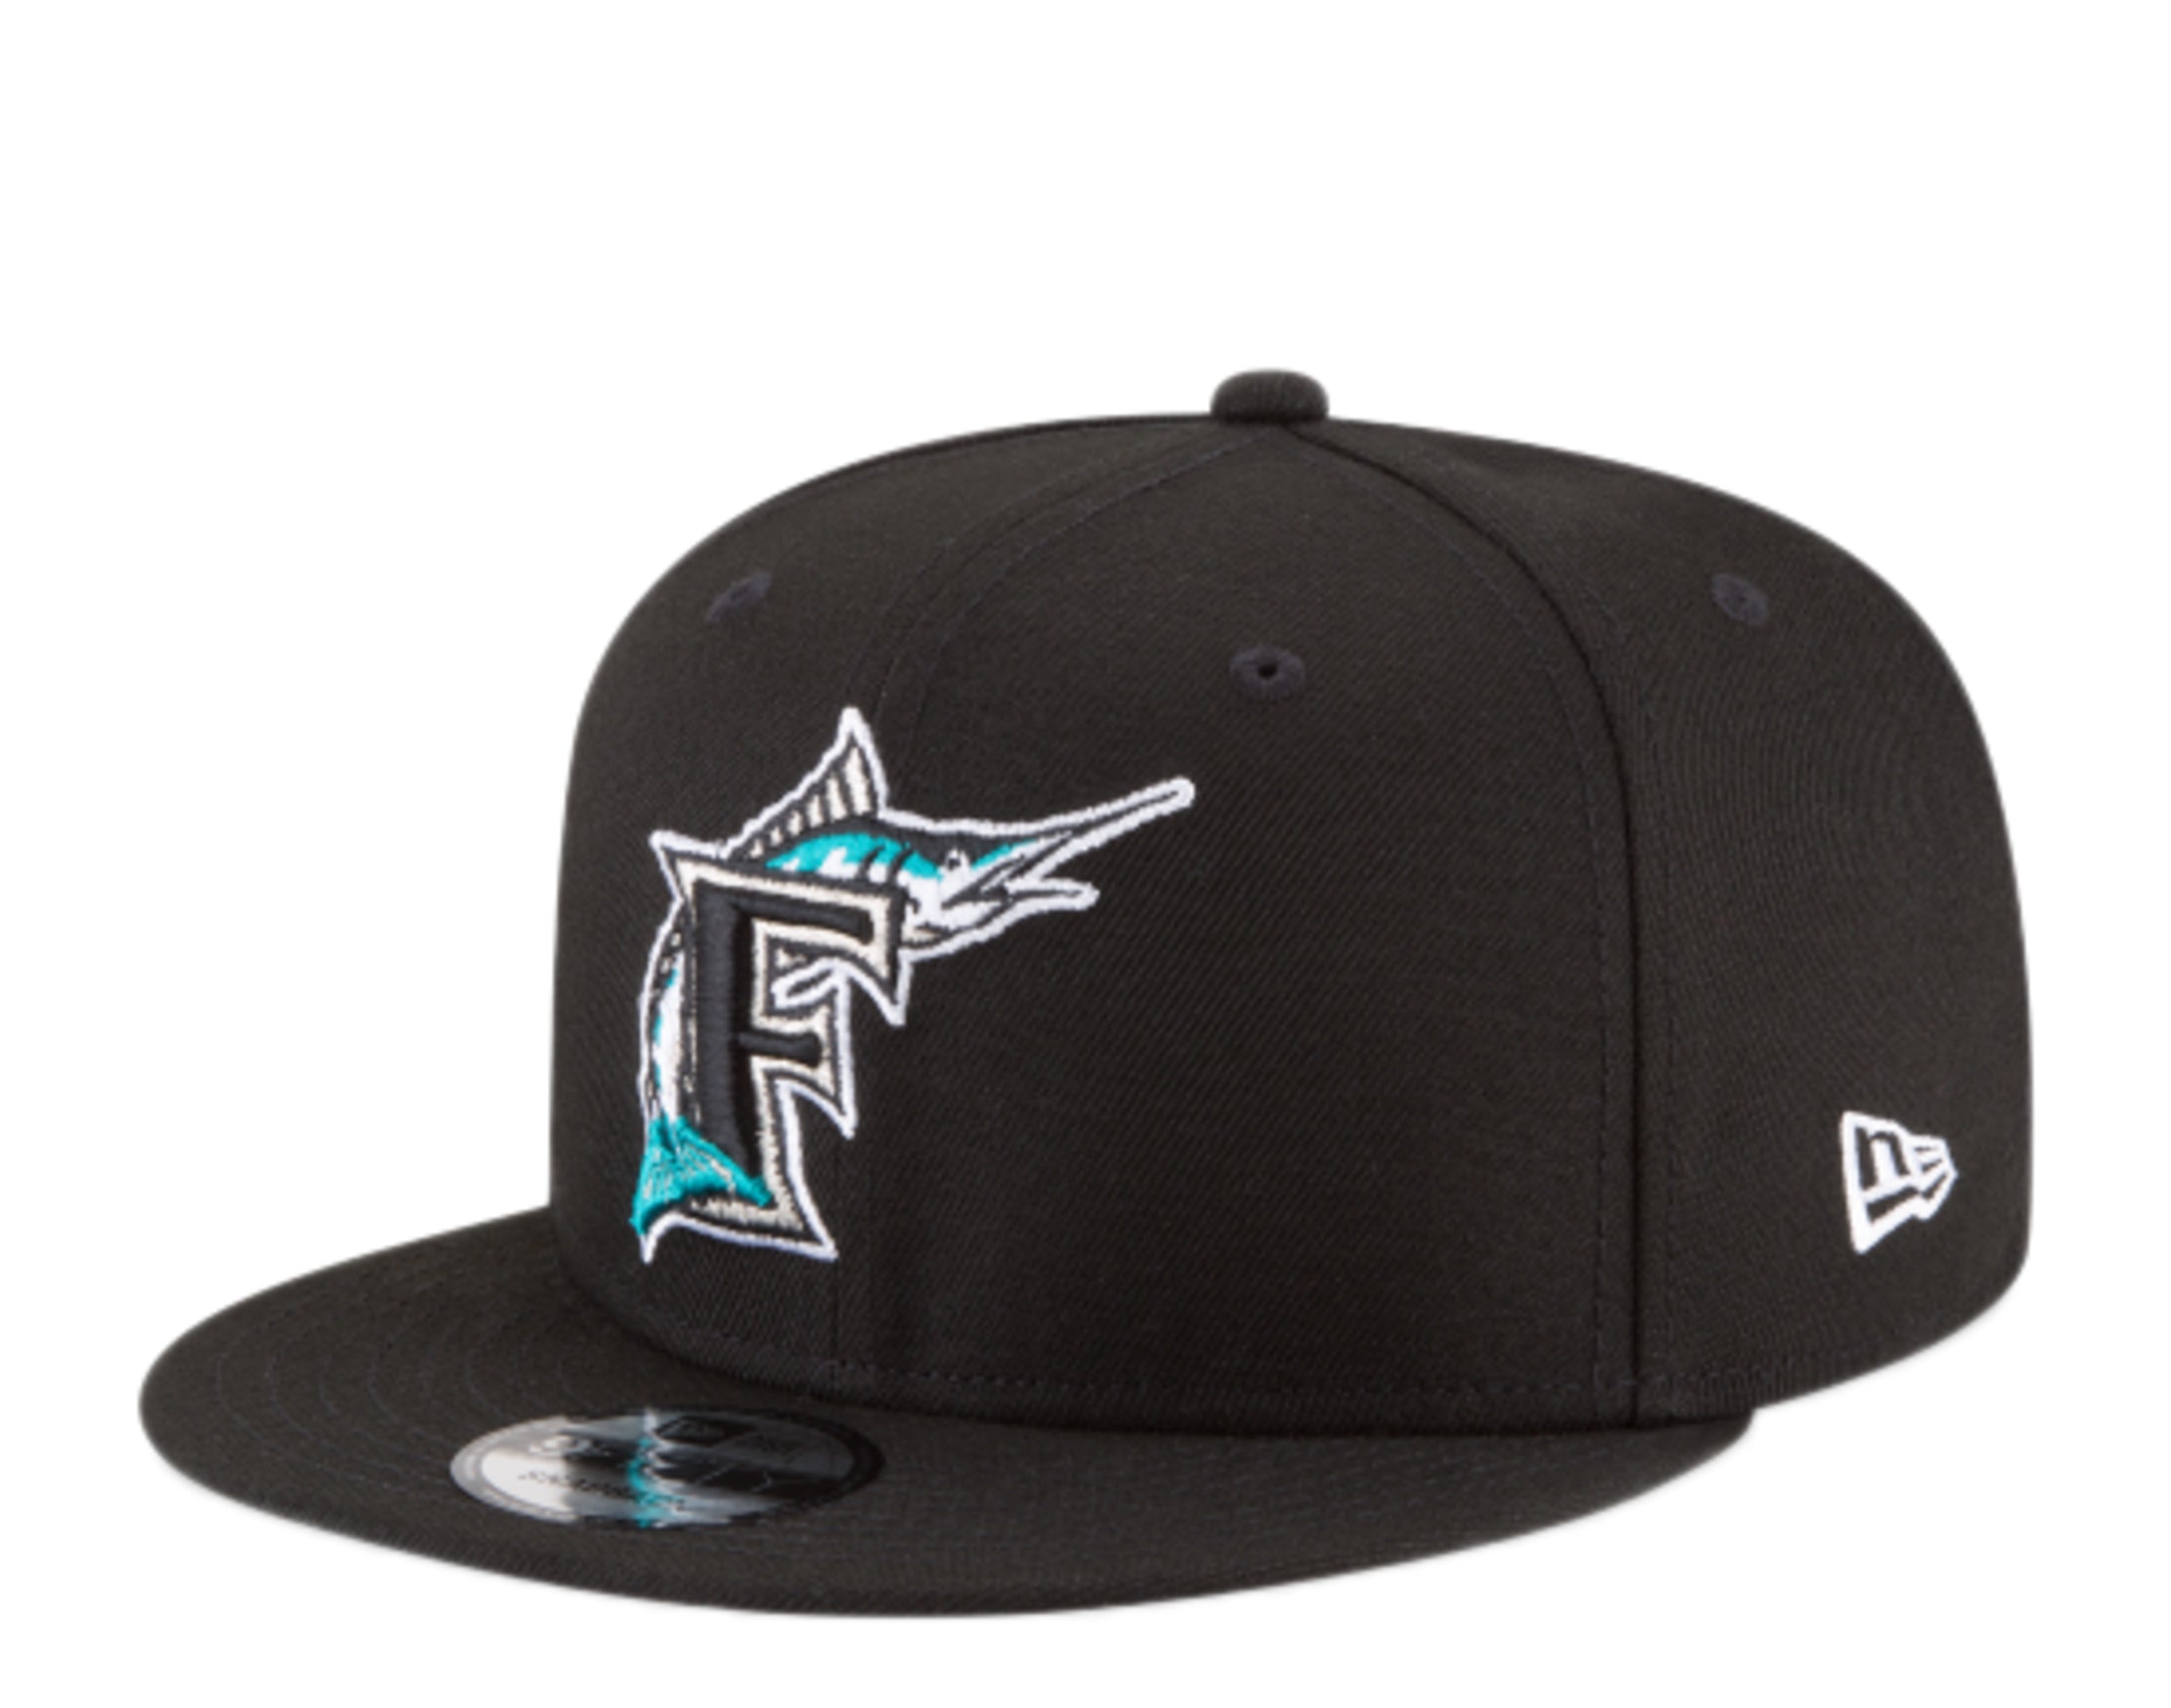 New Era, Accessories, Miami Marlins New Era 9fifty Snapback Loandepot  Park Team Store Exclusive